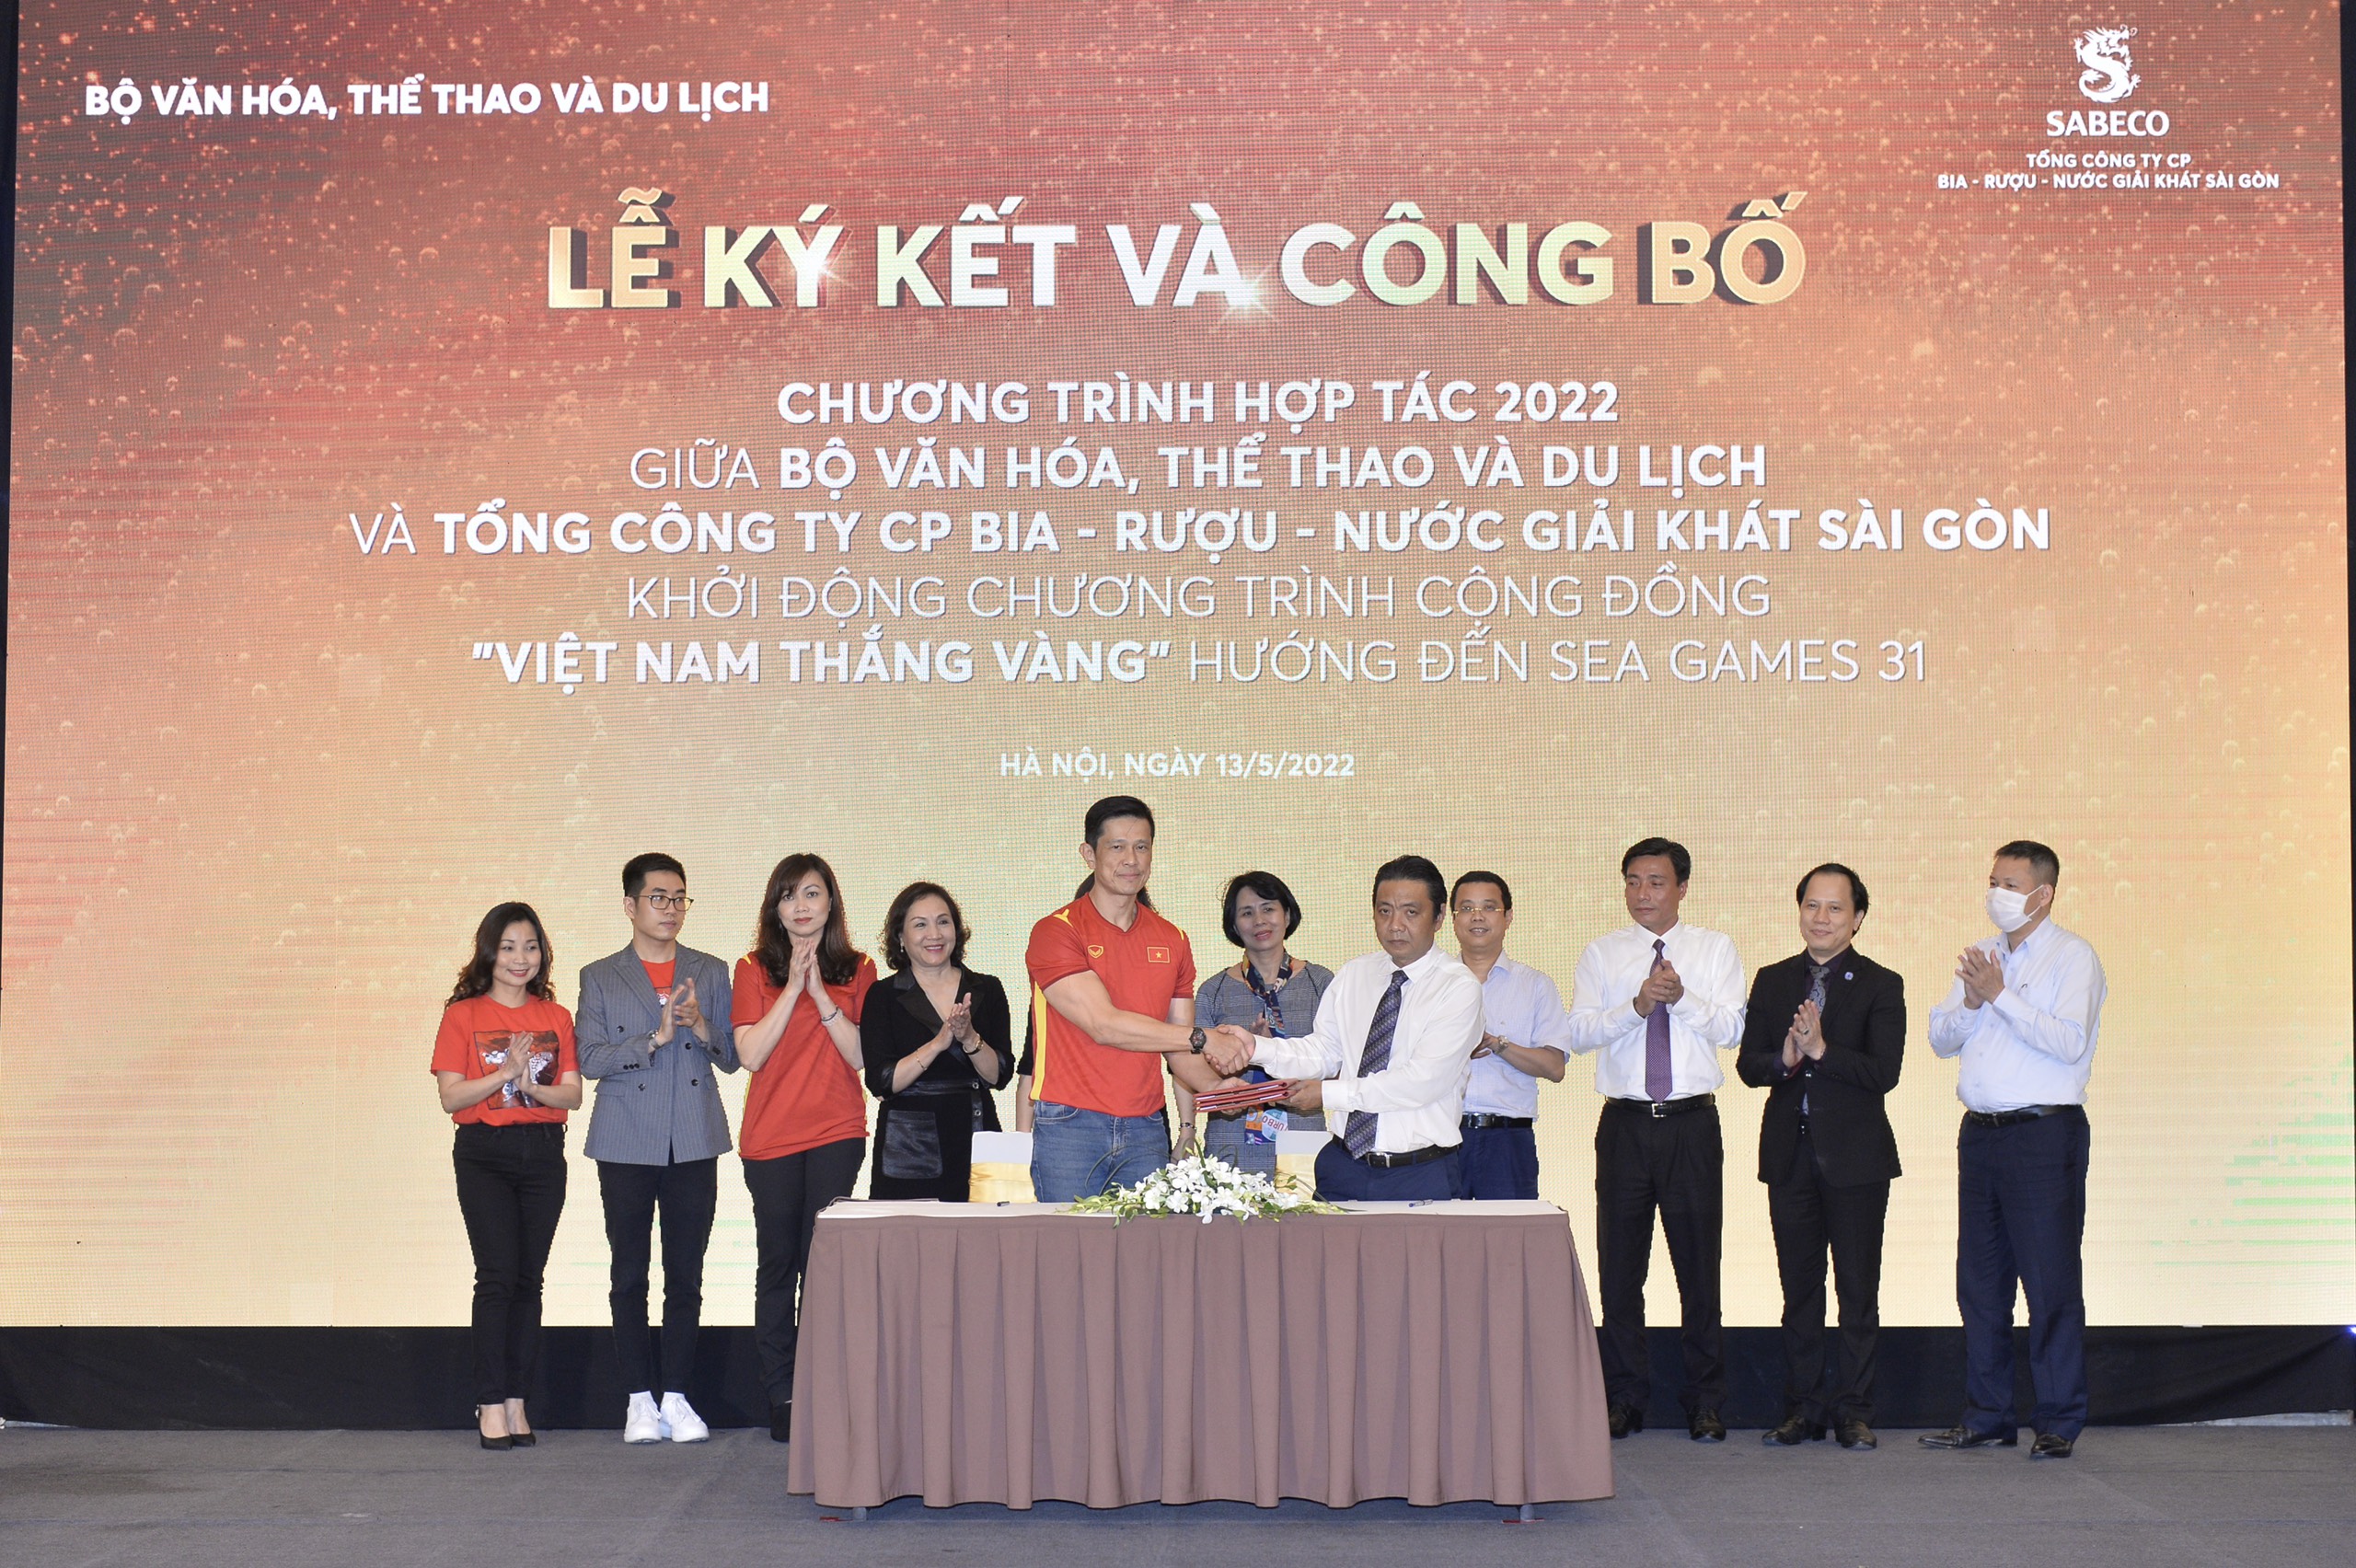 THE MINISTRY OF CULTURE, SPORTS AND TOURISM AND SABECO ANNOUNCE THE COOPERATION PROGRAM IN 2022, AND LAUNCH THE “VIETNAM WINS GOLD” INITIATIVE